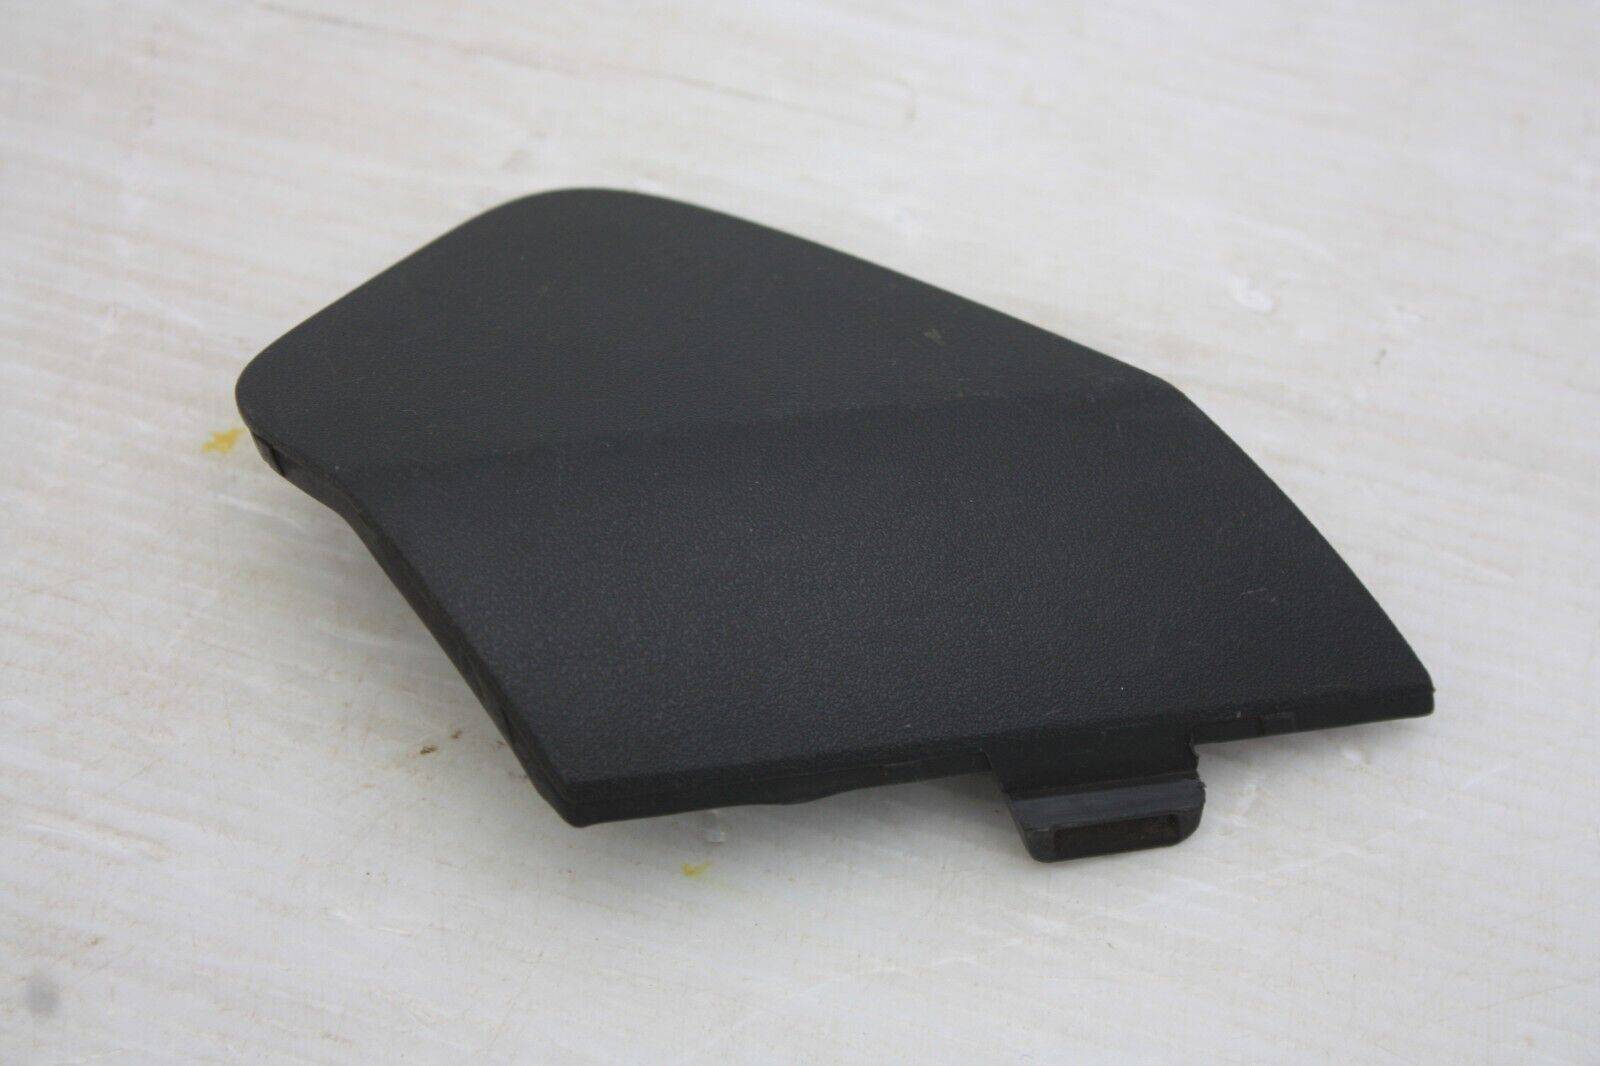 Ford-Fiesta-Front-Bumper-Tow-Cover-2008-TO-2012-8A61-17A989-A-Genuine-175685891847-4